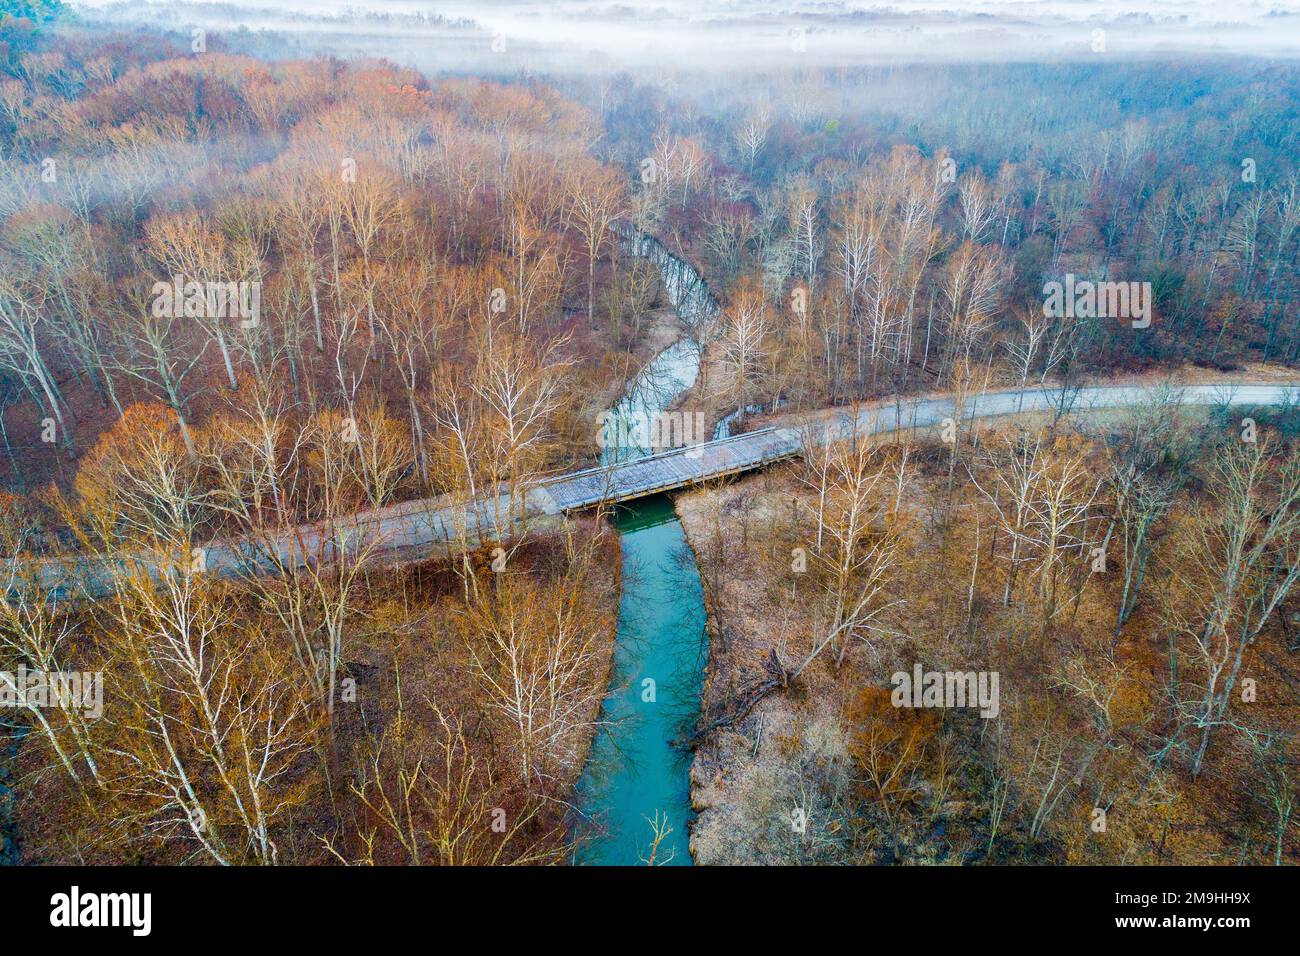 Aerial view of stream in forest in autumn, Stephen A. Forbes State Park, Marion County, Illinois, USA Stock Photo